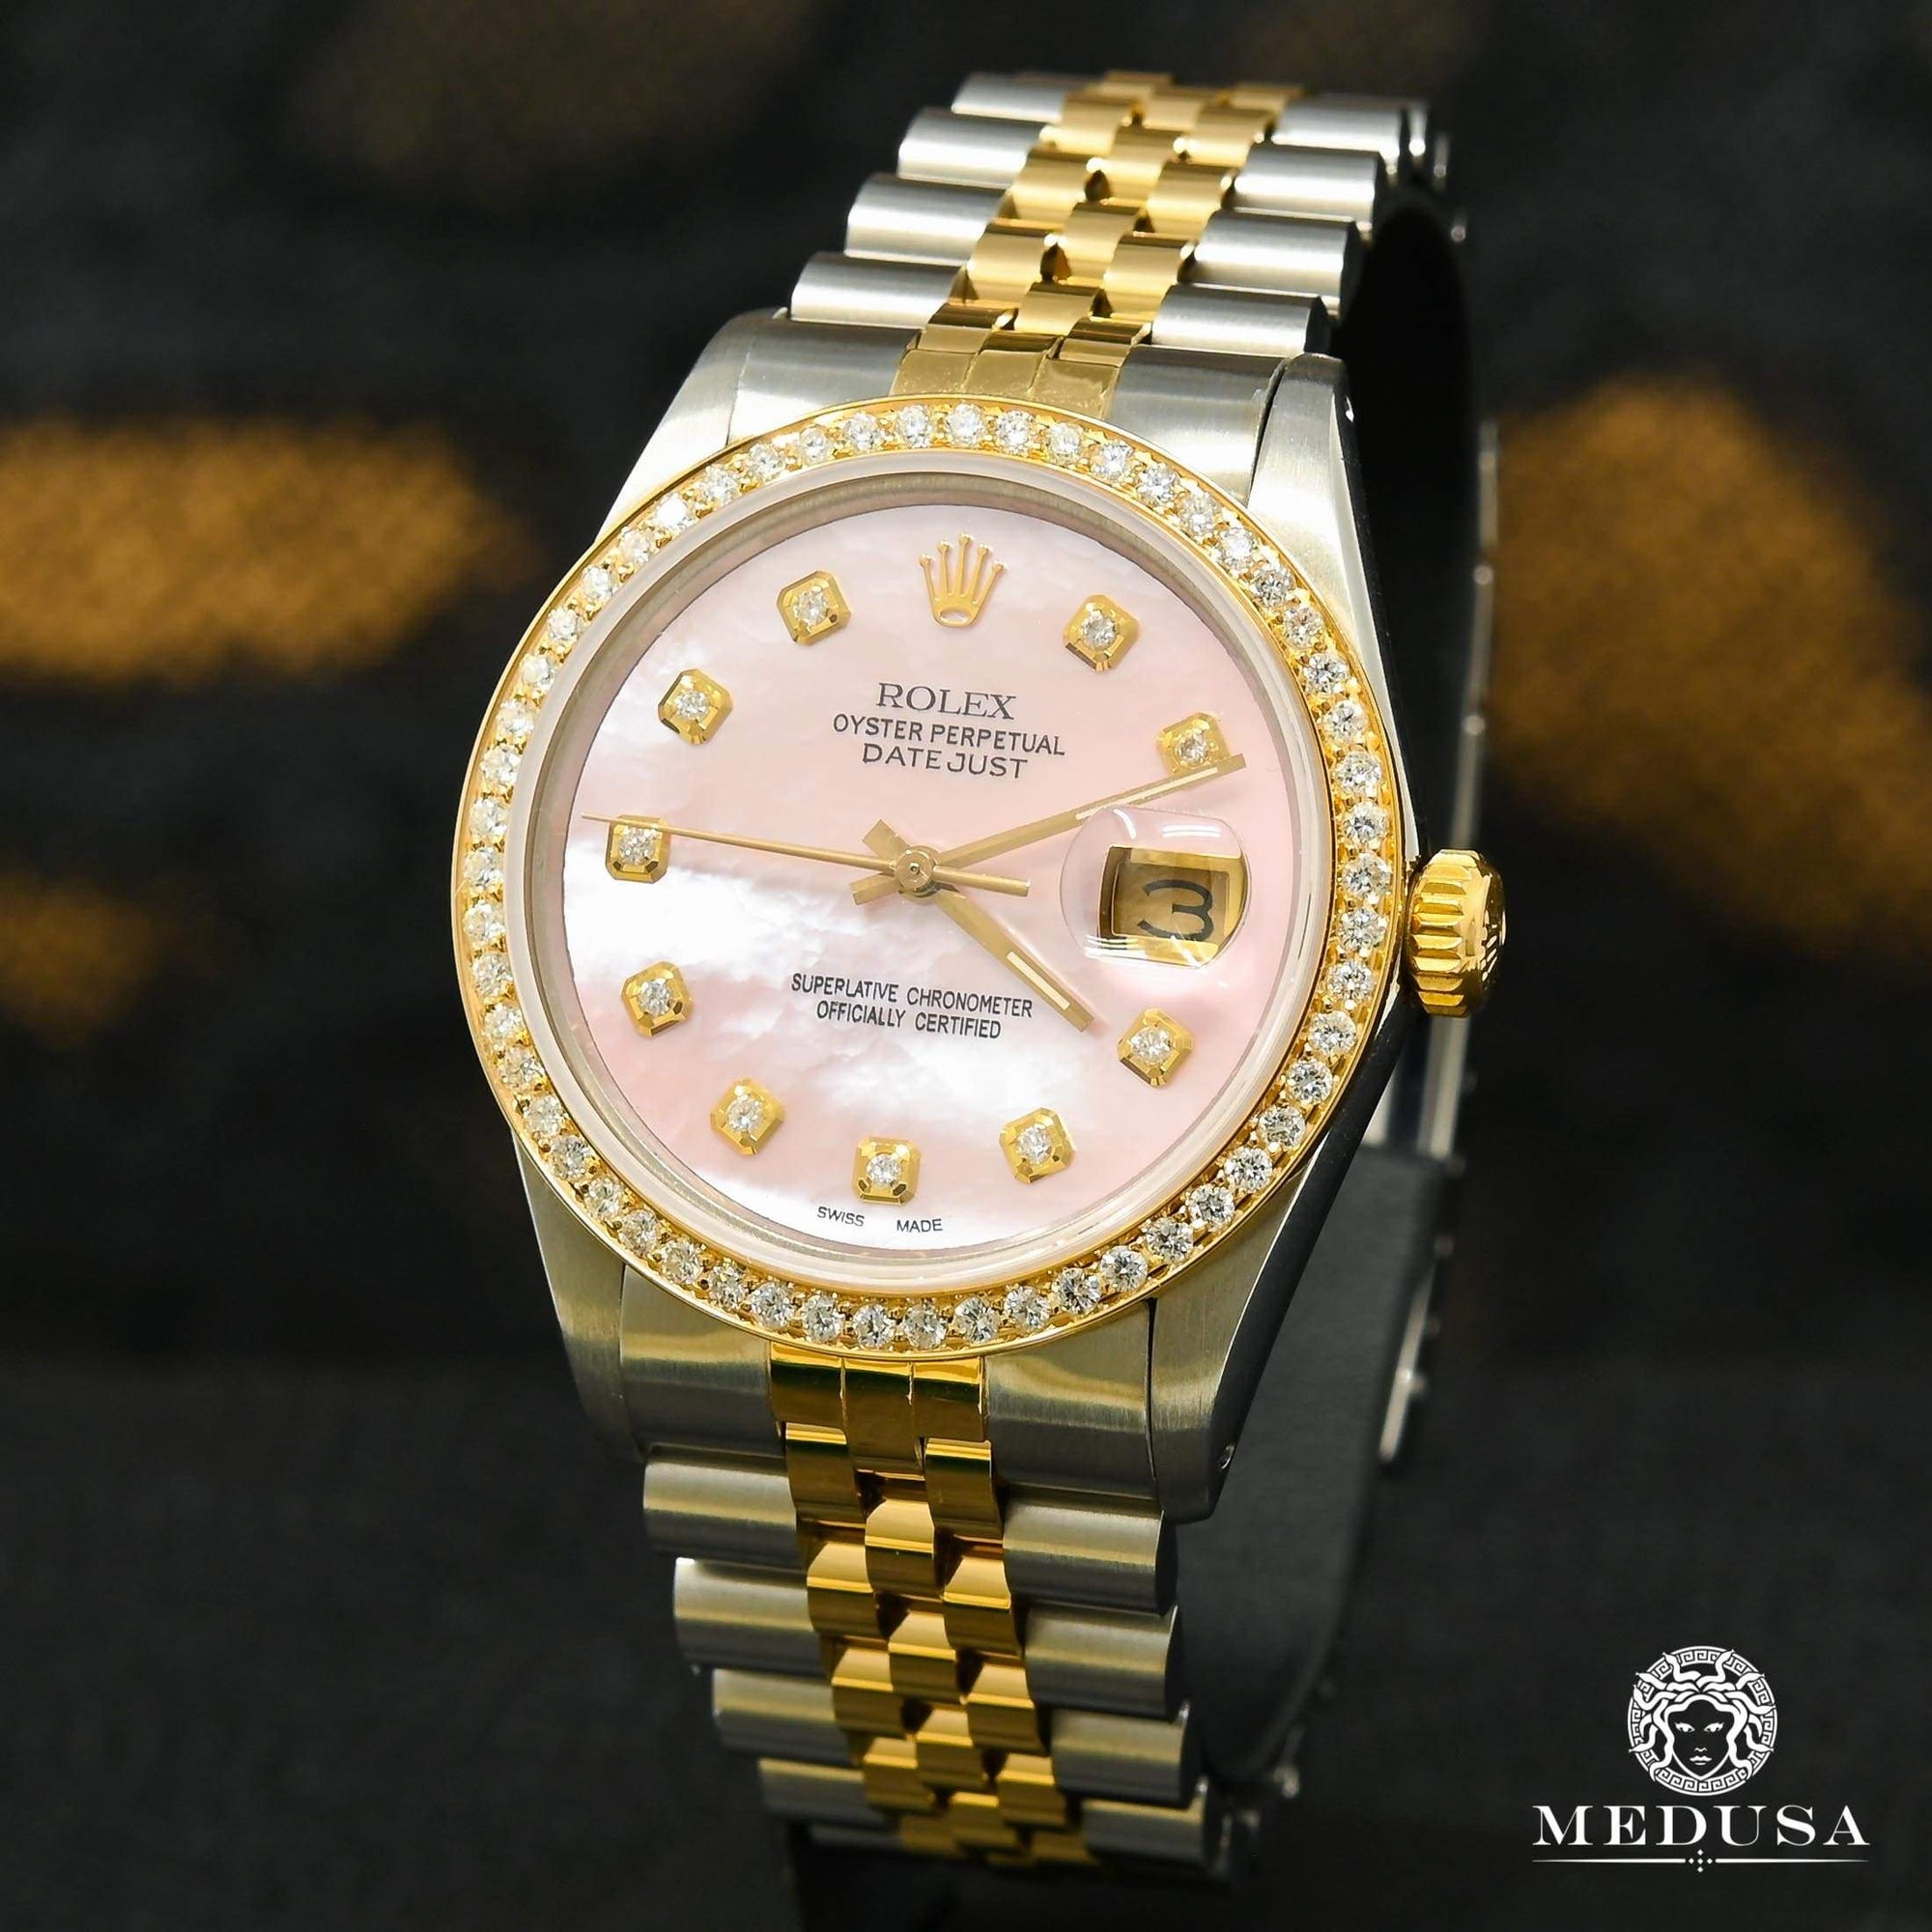 Montre Rolex | Montre Homme Rolex Datejust 36mm - Pink ’’Mother of Pearl’’ Or 2 Tons